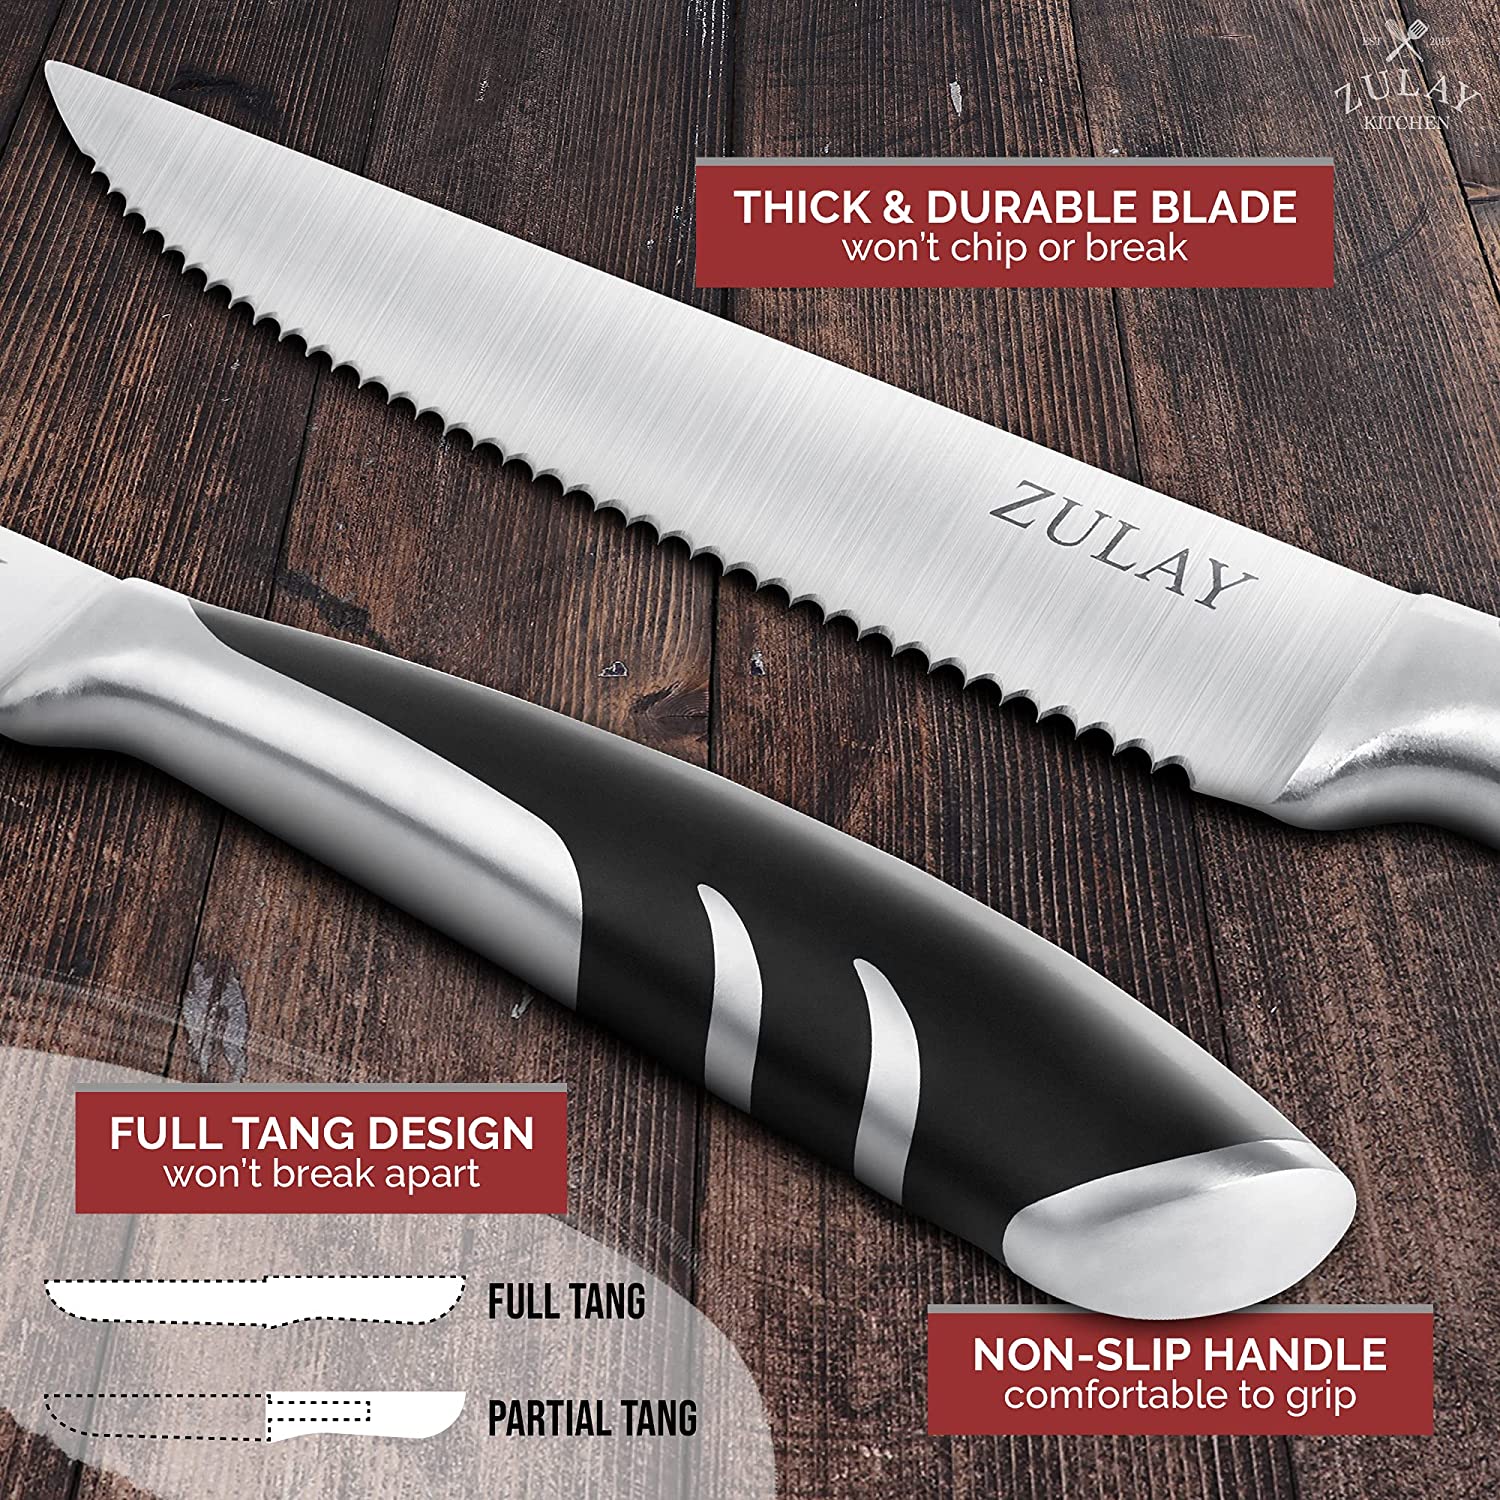 Ronco 4 Piece Steak Knife Set Stainless-Steel Serrated Blades Full-Tang Knives